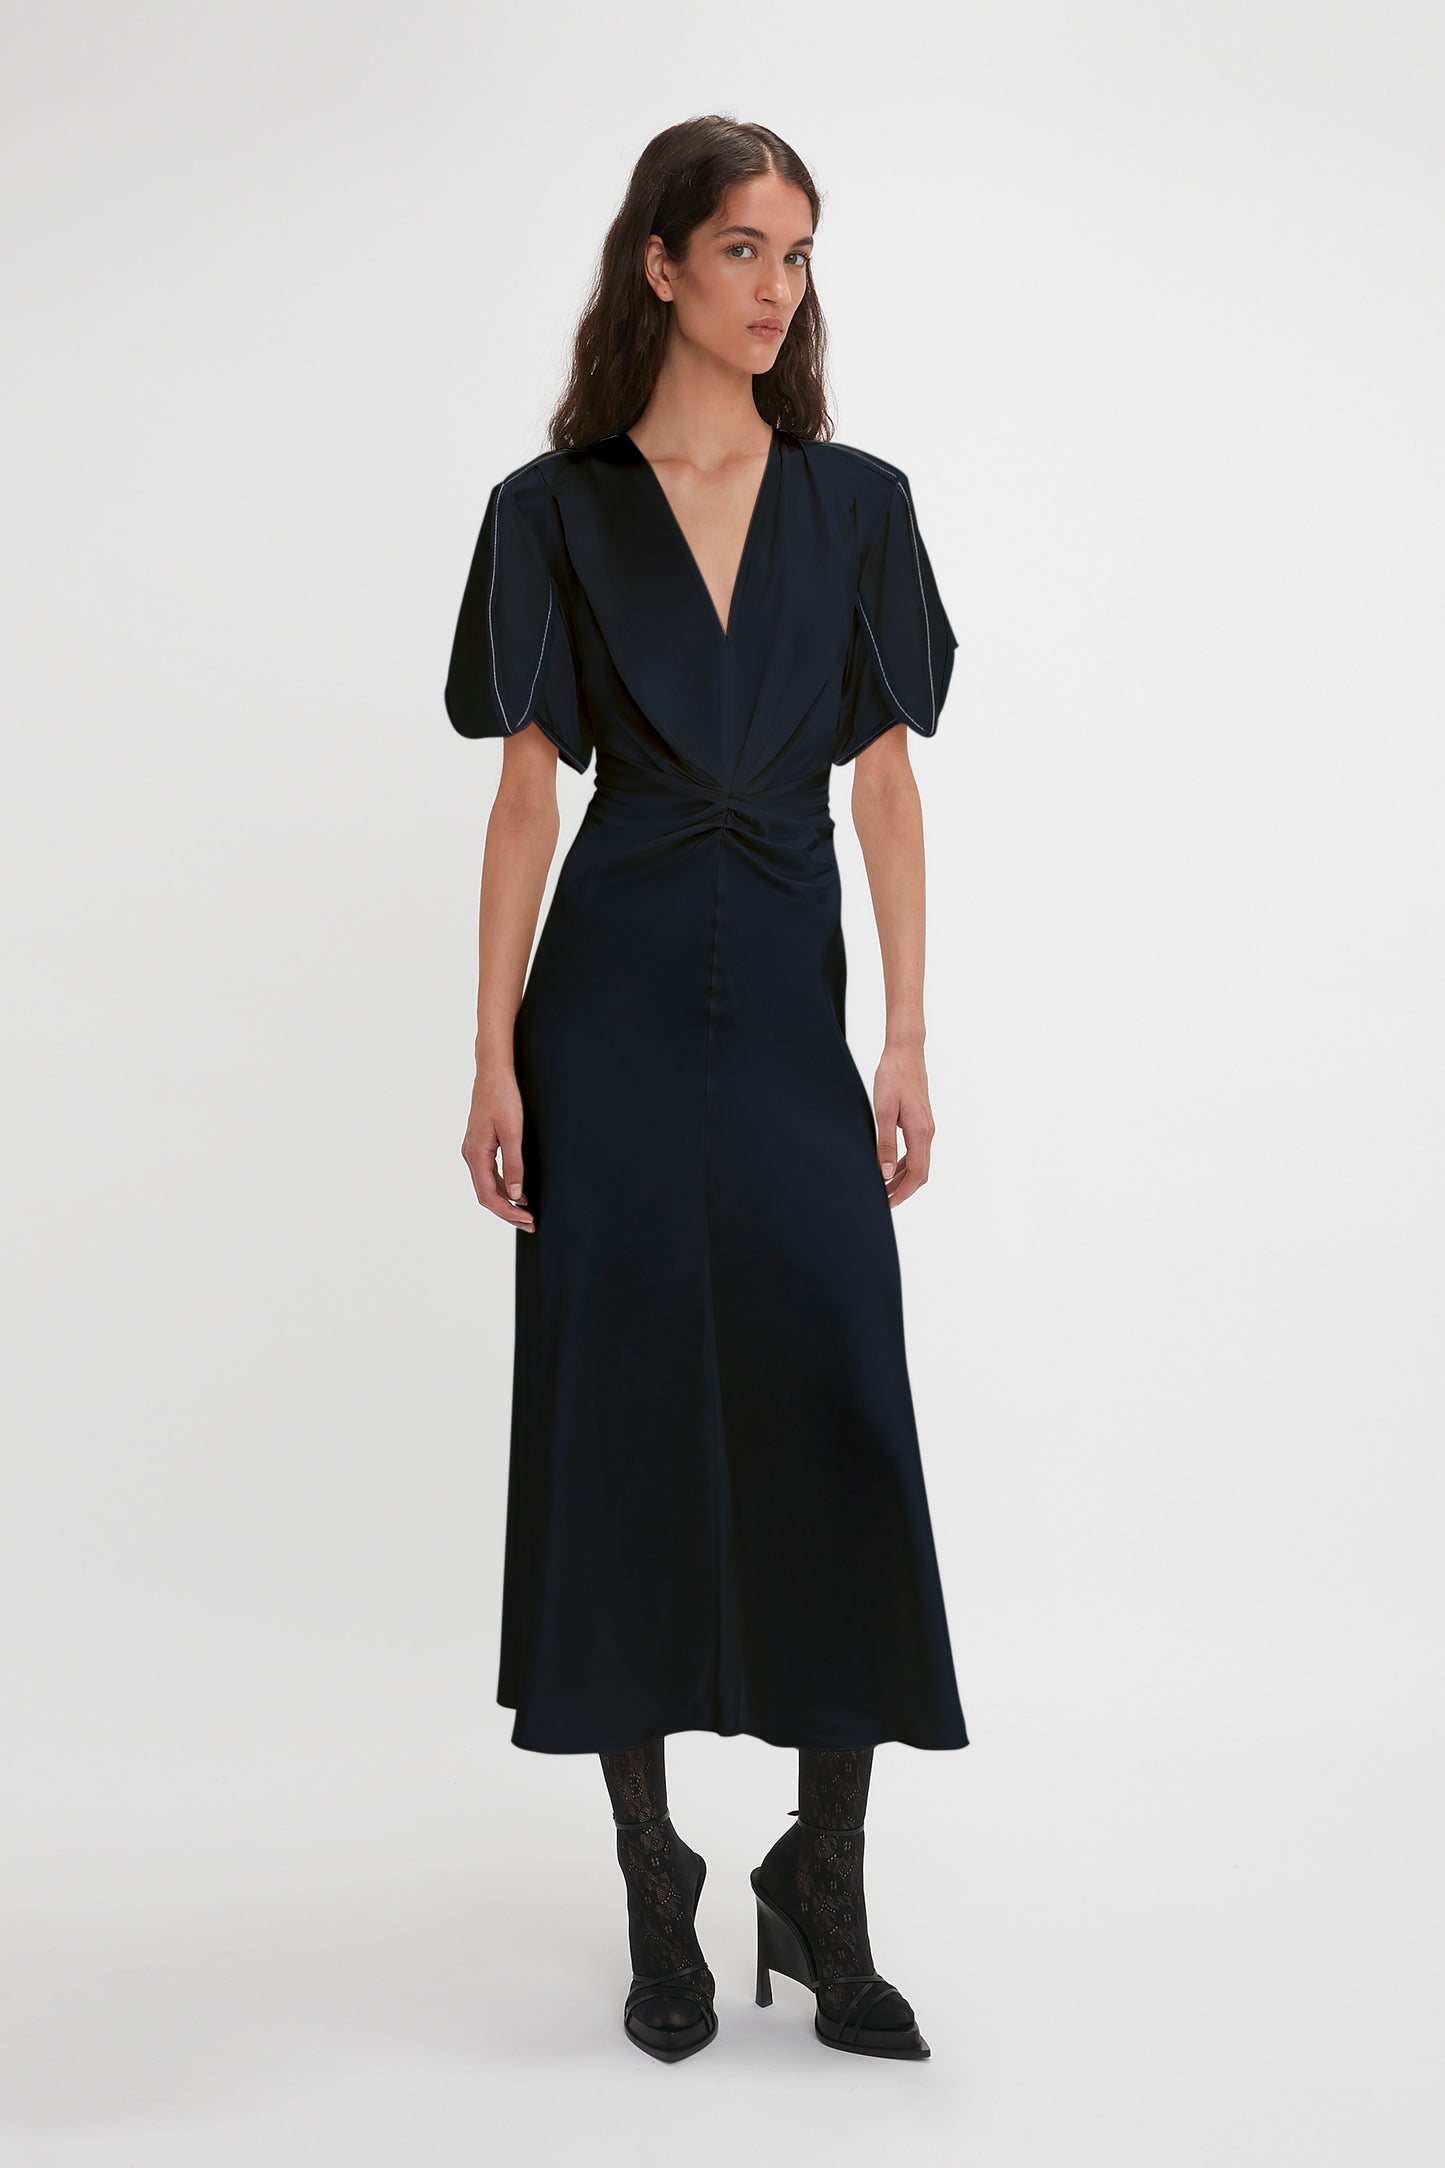 A woman wearing a Victoria Beckham navy blue Exclusive Gathered V-neck midi dress with puffed sleeves, stretch fabric, and black lace-up boots, standing in a studio with a white background.